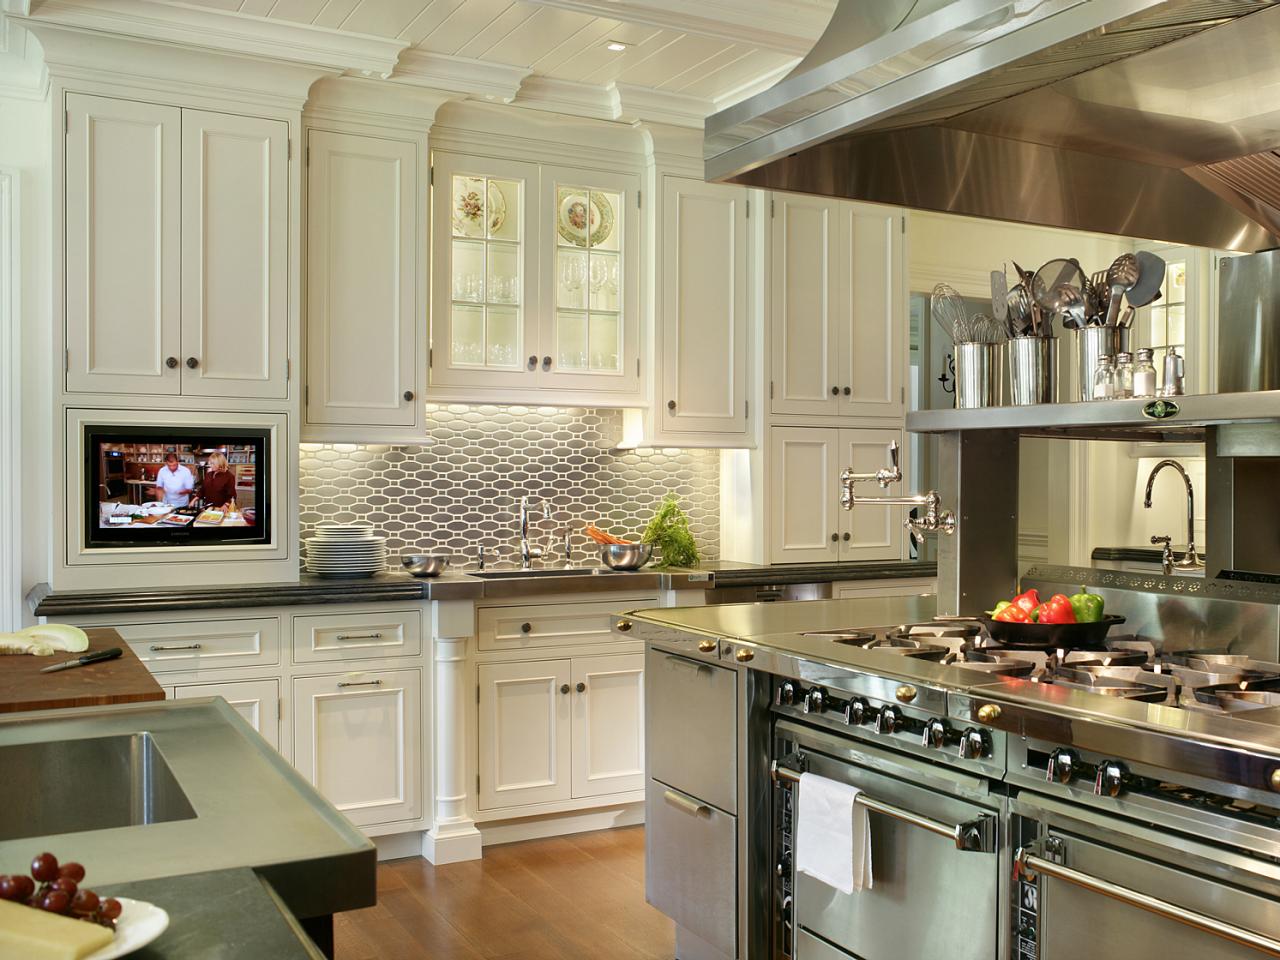 Kitchen Wall Cabinets: Pictures, Options, Tips & Ideas  HGTV